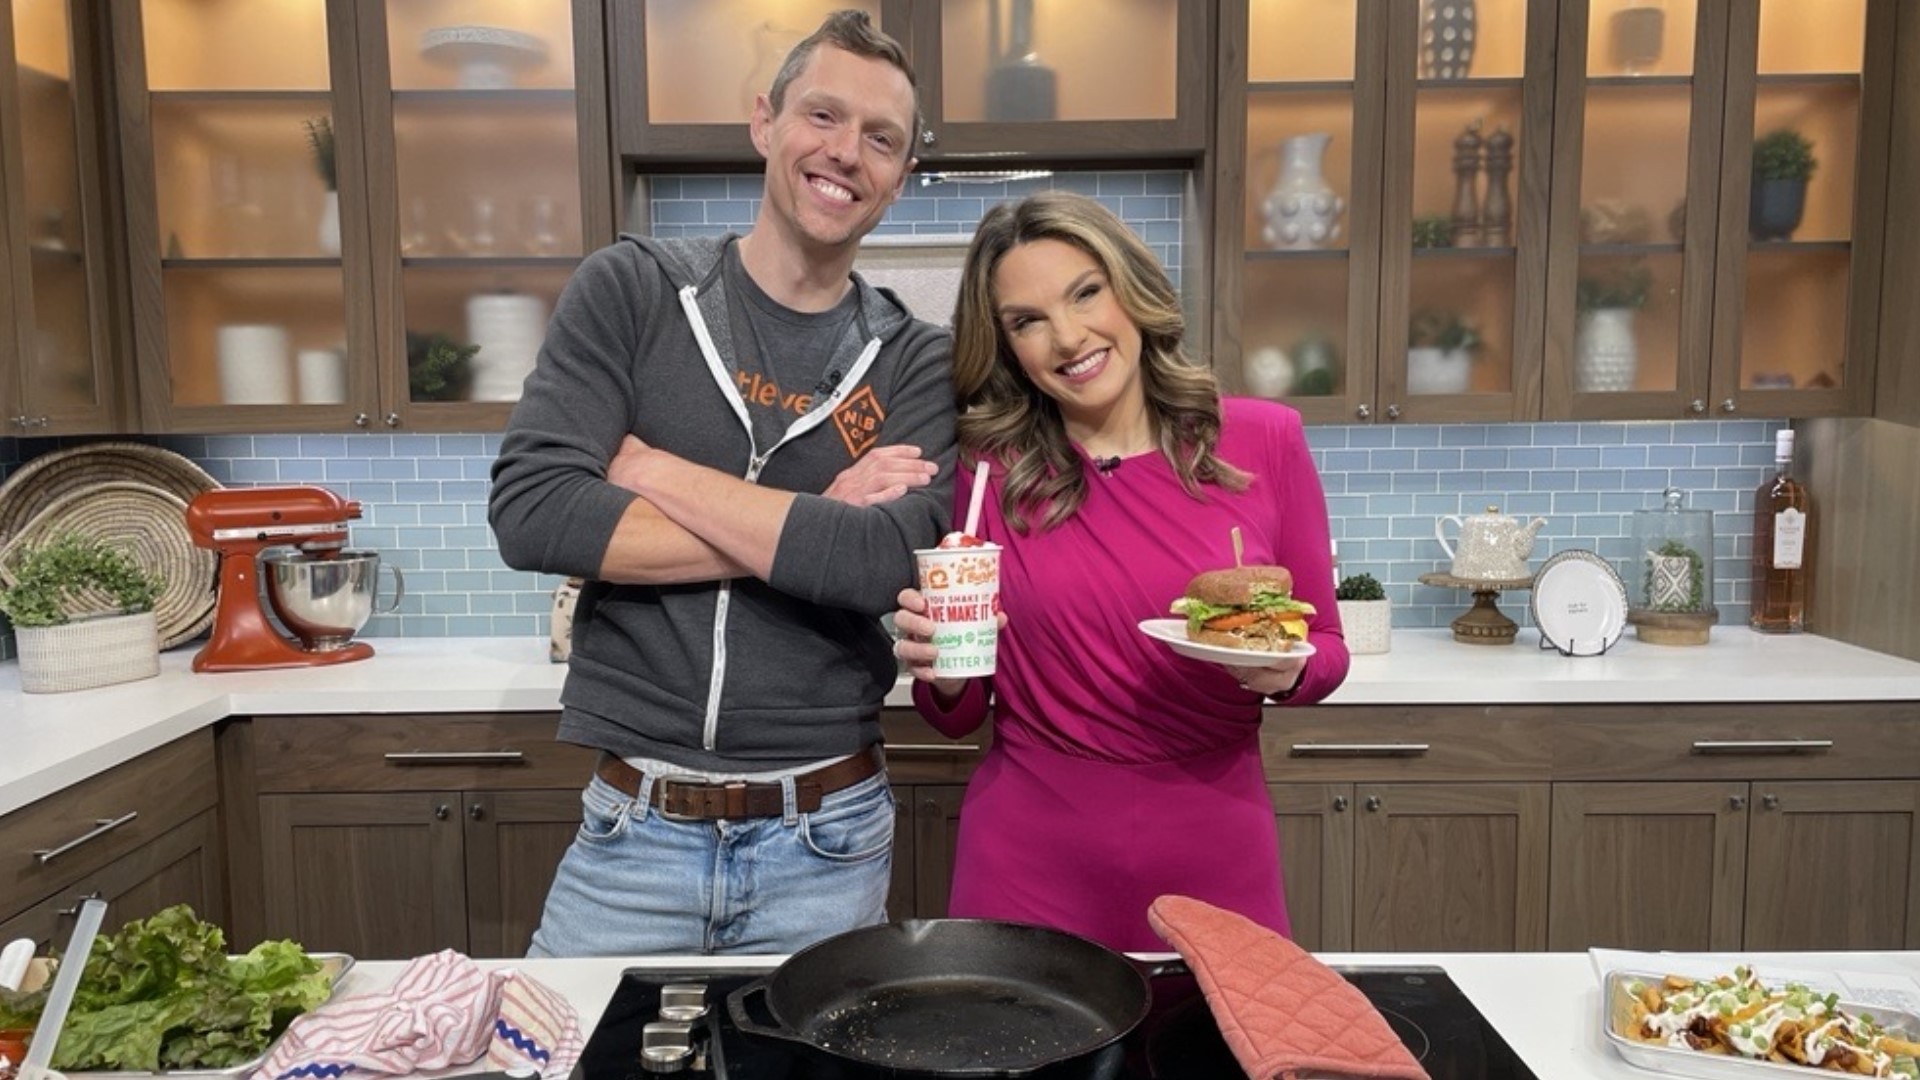 Founder of Next Level Burger Matt de Gruyter joined the show to chat about his plant based burger restaurant and what they offer up. #newdaynw